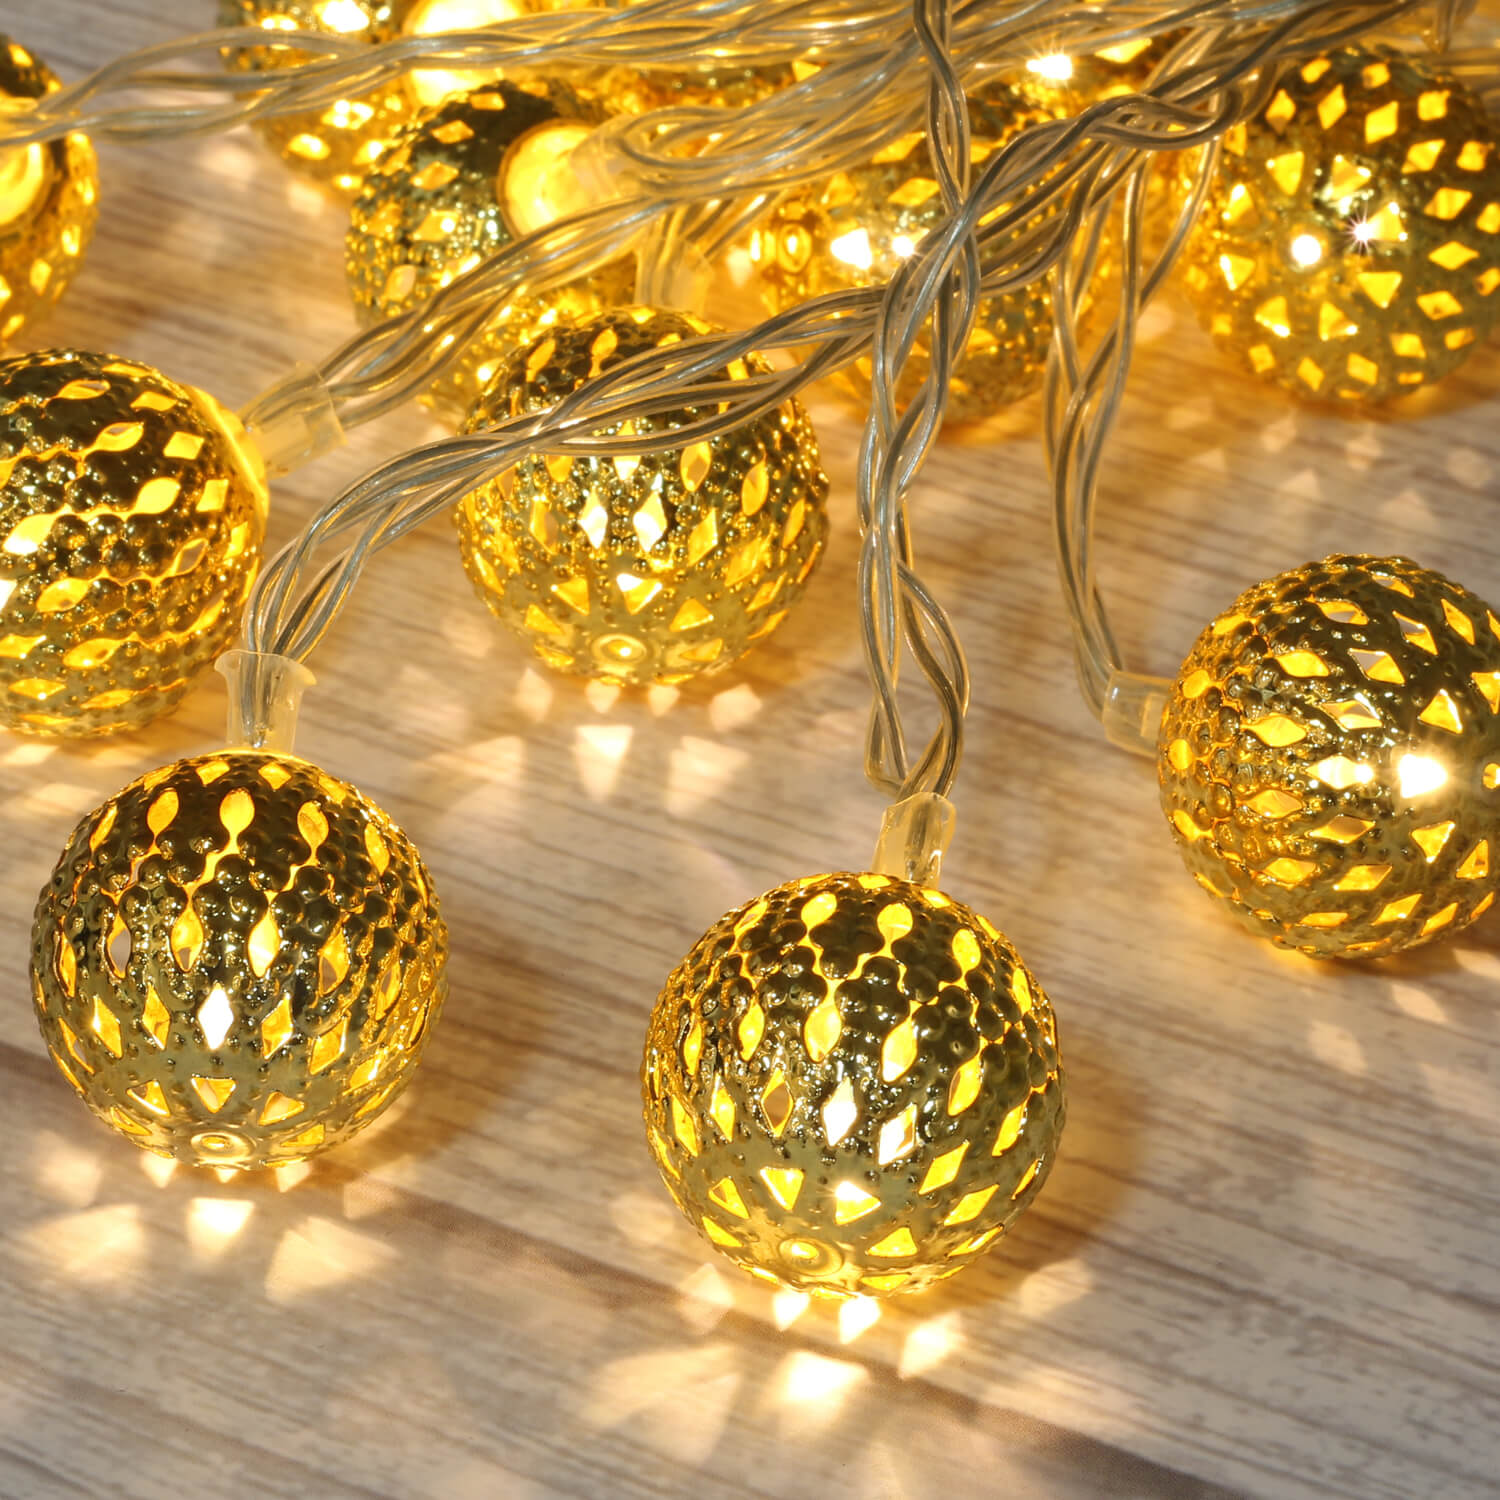 LOUIS CHOICE LED Globe String Lights, Decorative Moroccan Orb, 20 Big  Silver Metal Balls, Bright Warm Lights, Battery Powered